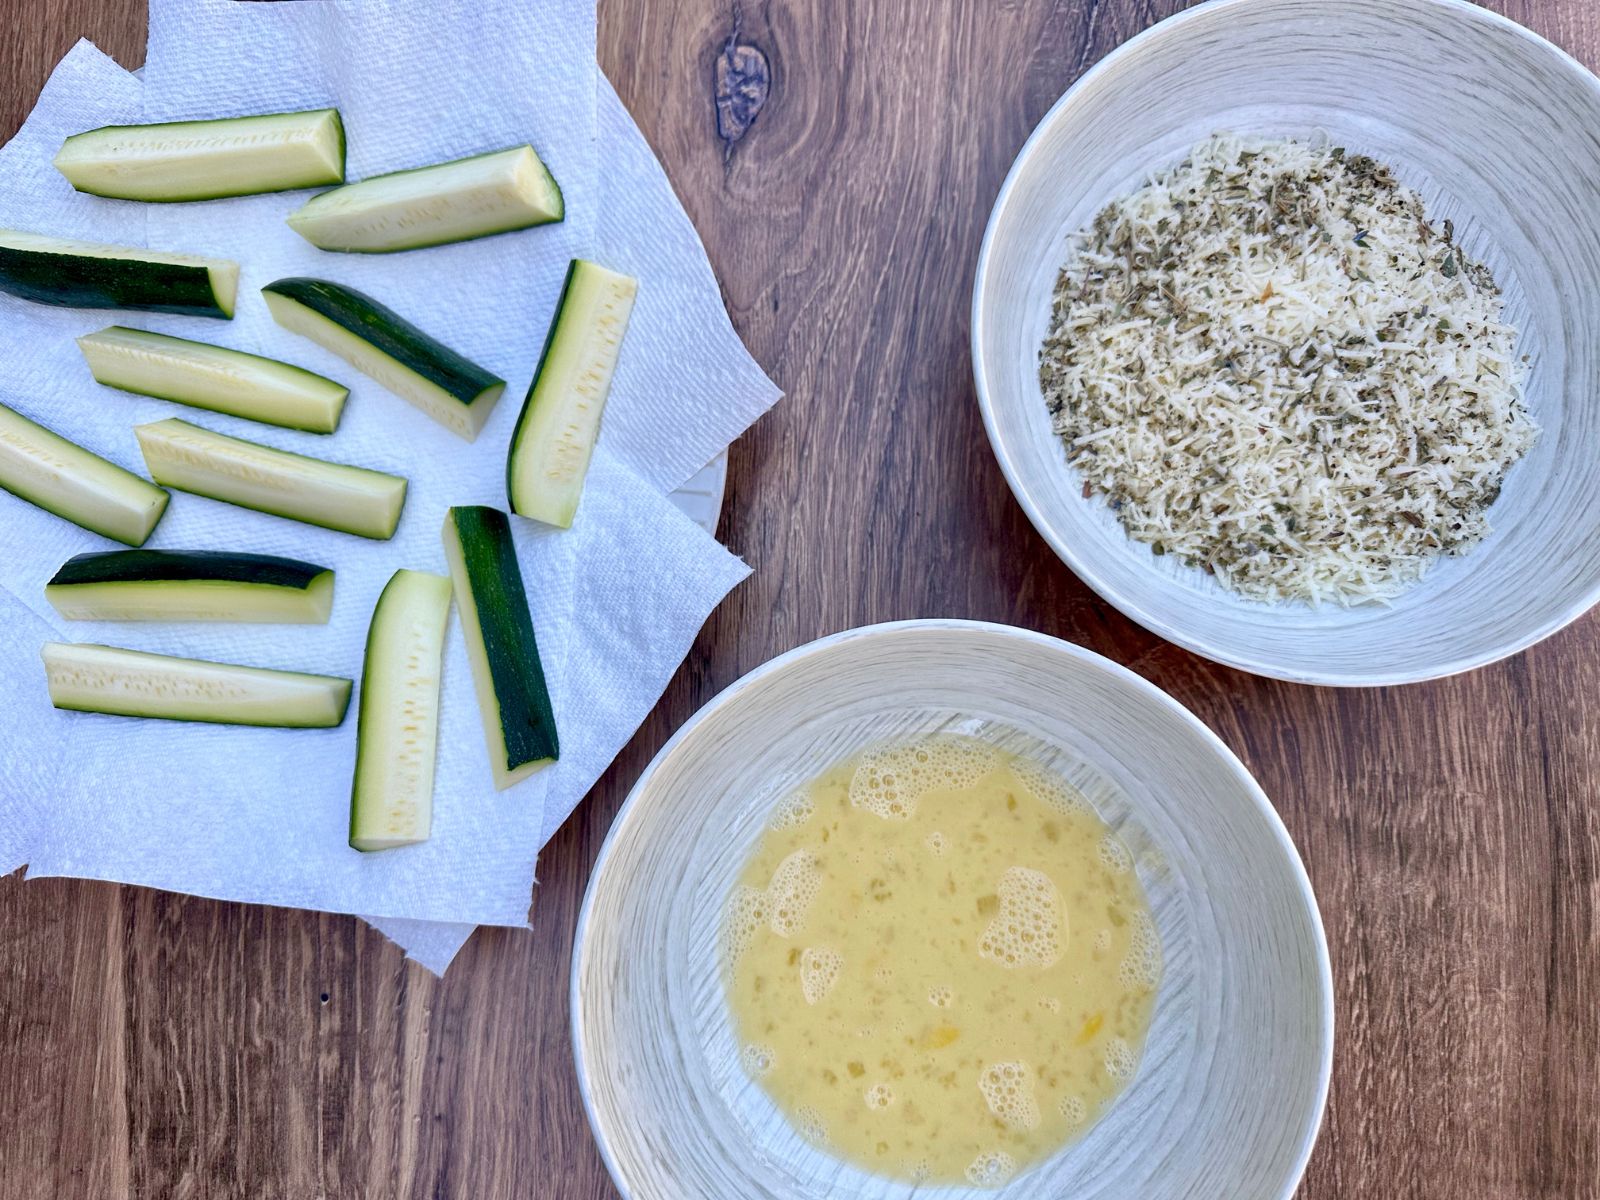 zucchini sticks on paper towels, a beaten egg in a bowl, and cheese + spices in another bowl.